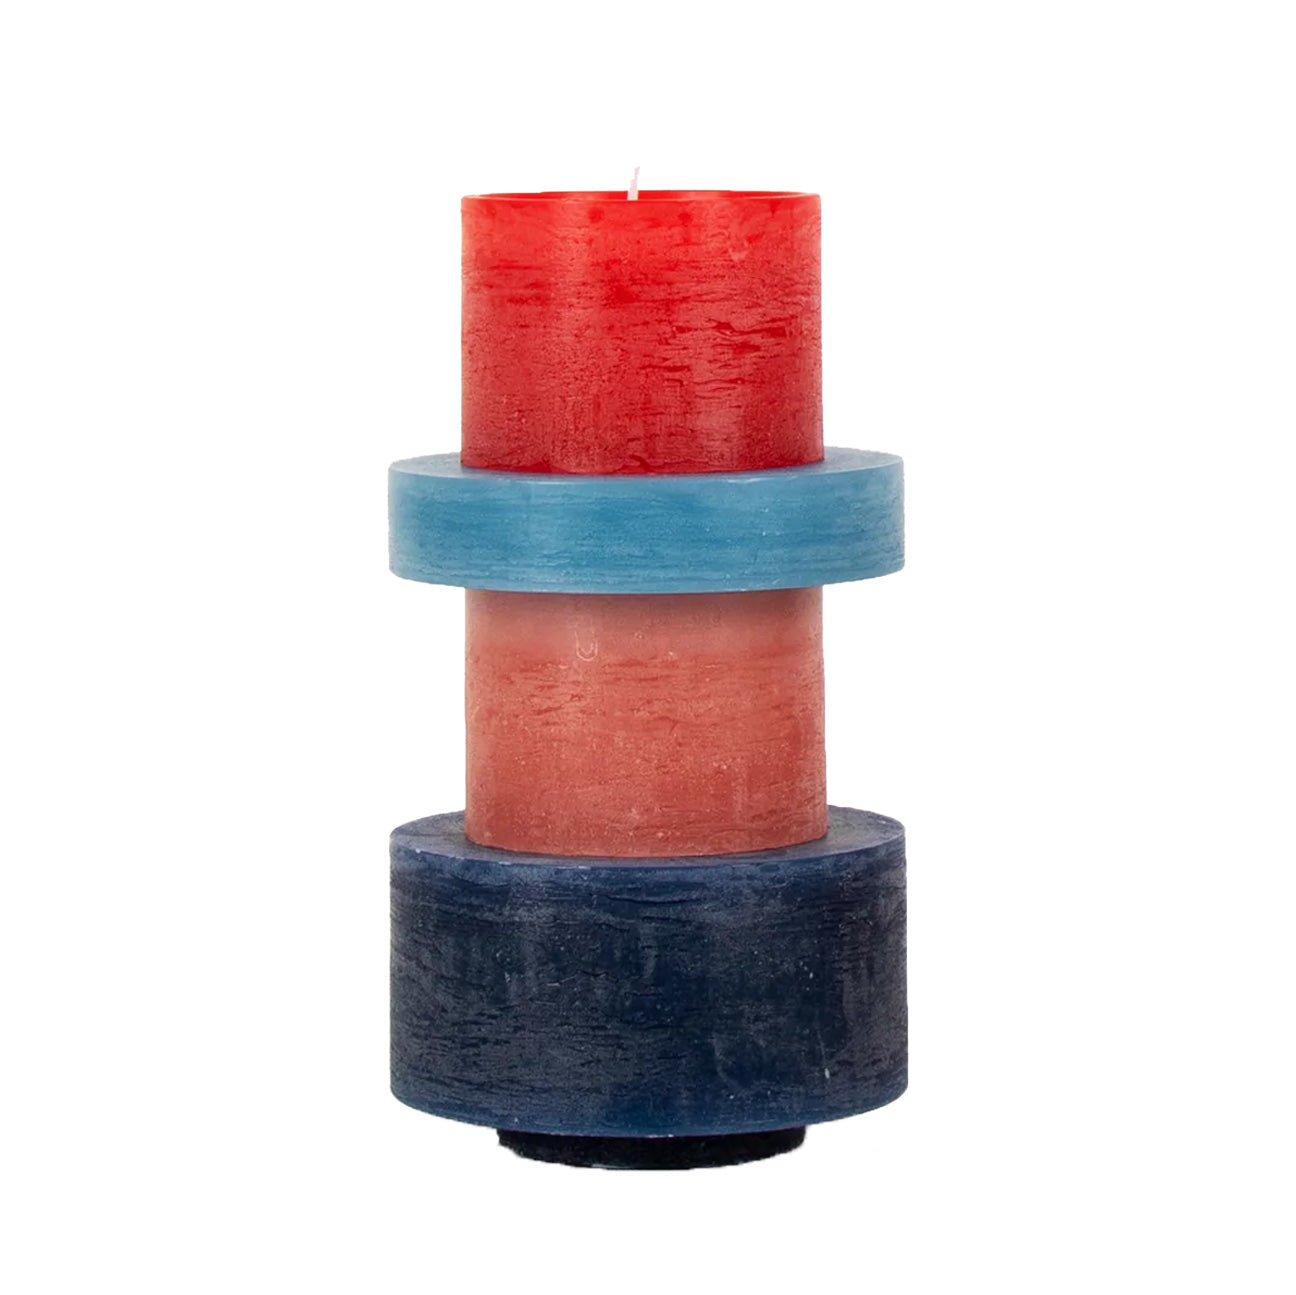 Candle Stack 04 in Red and Blue